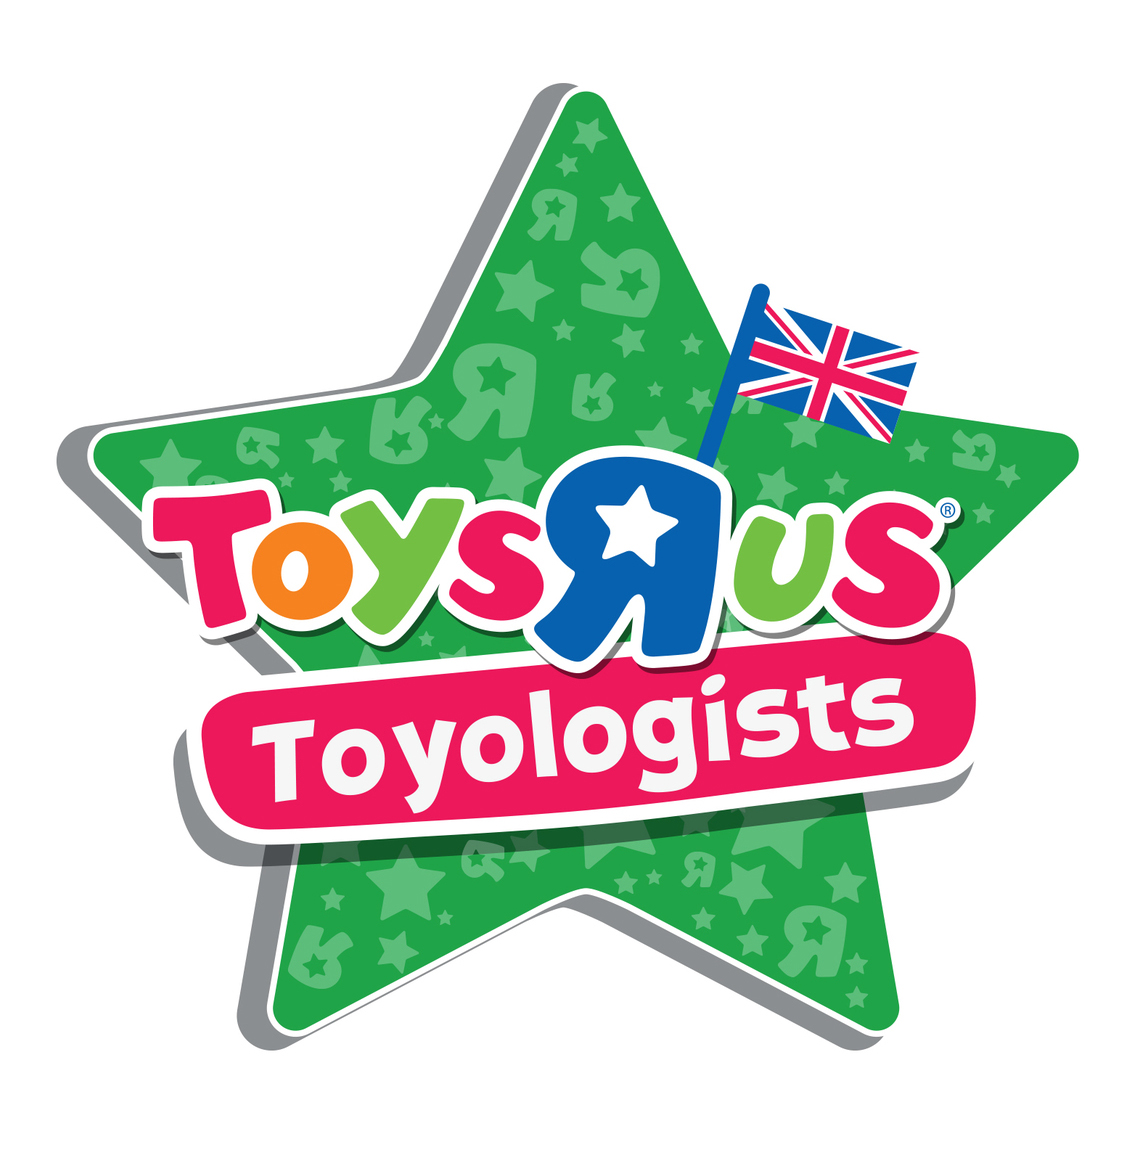 Toyologists